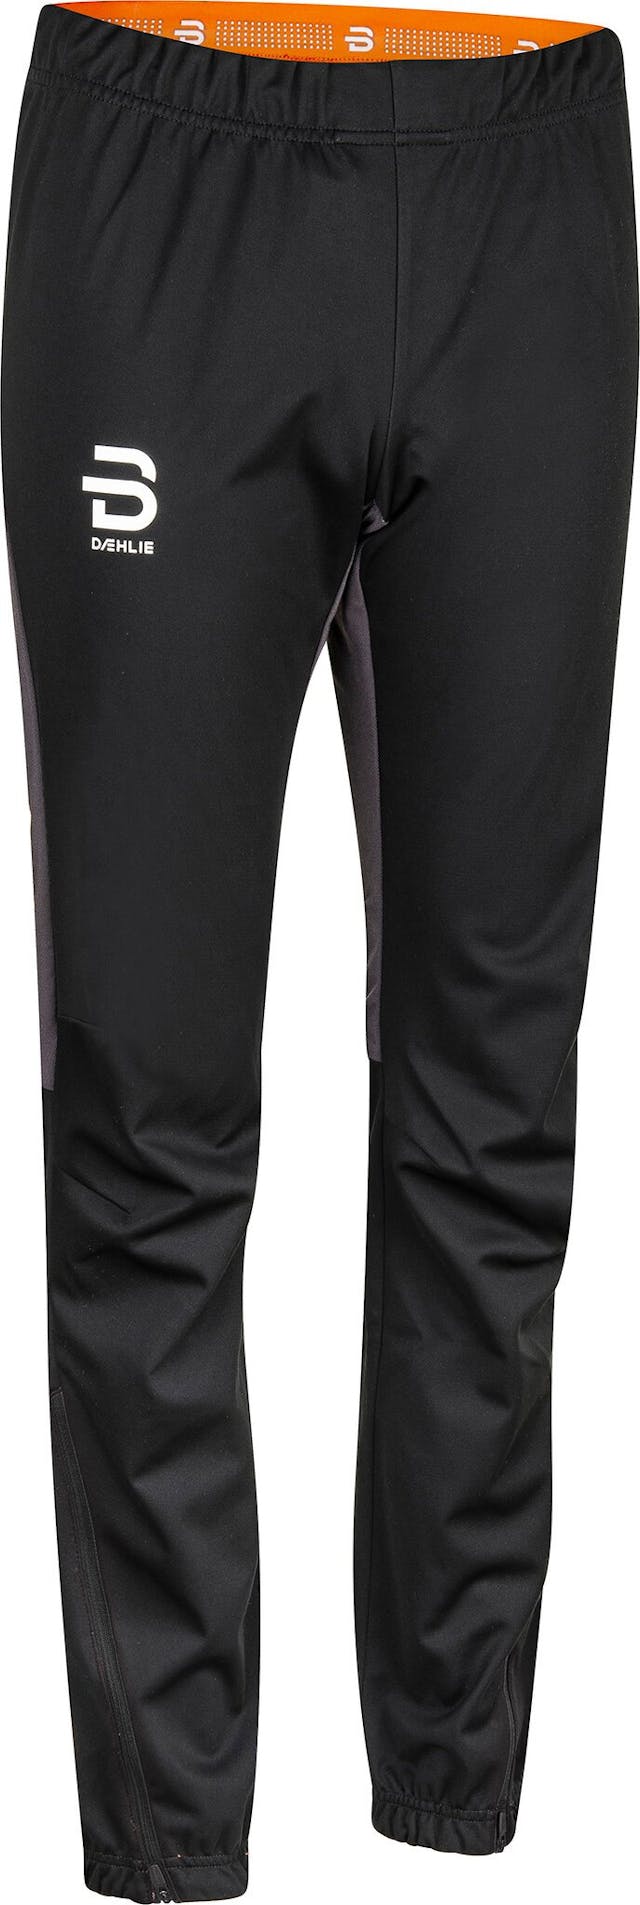 Product image for Power Pants - Women's